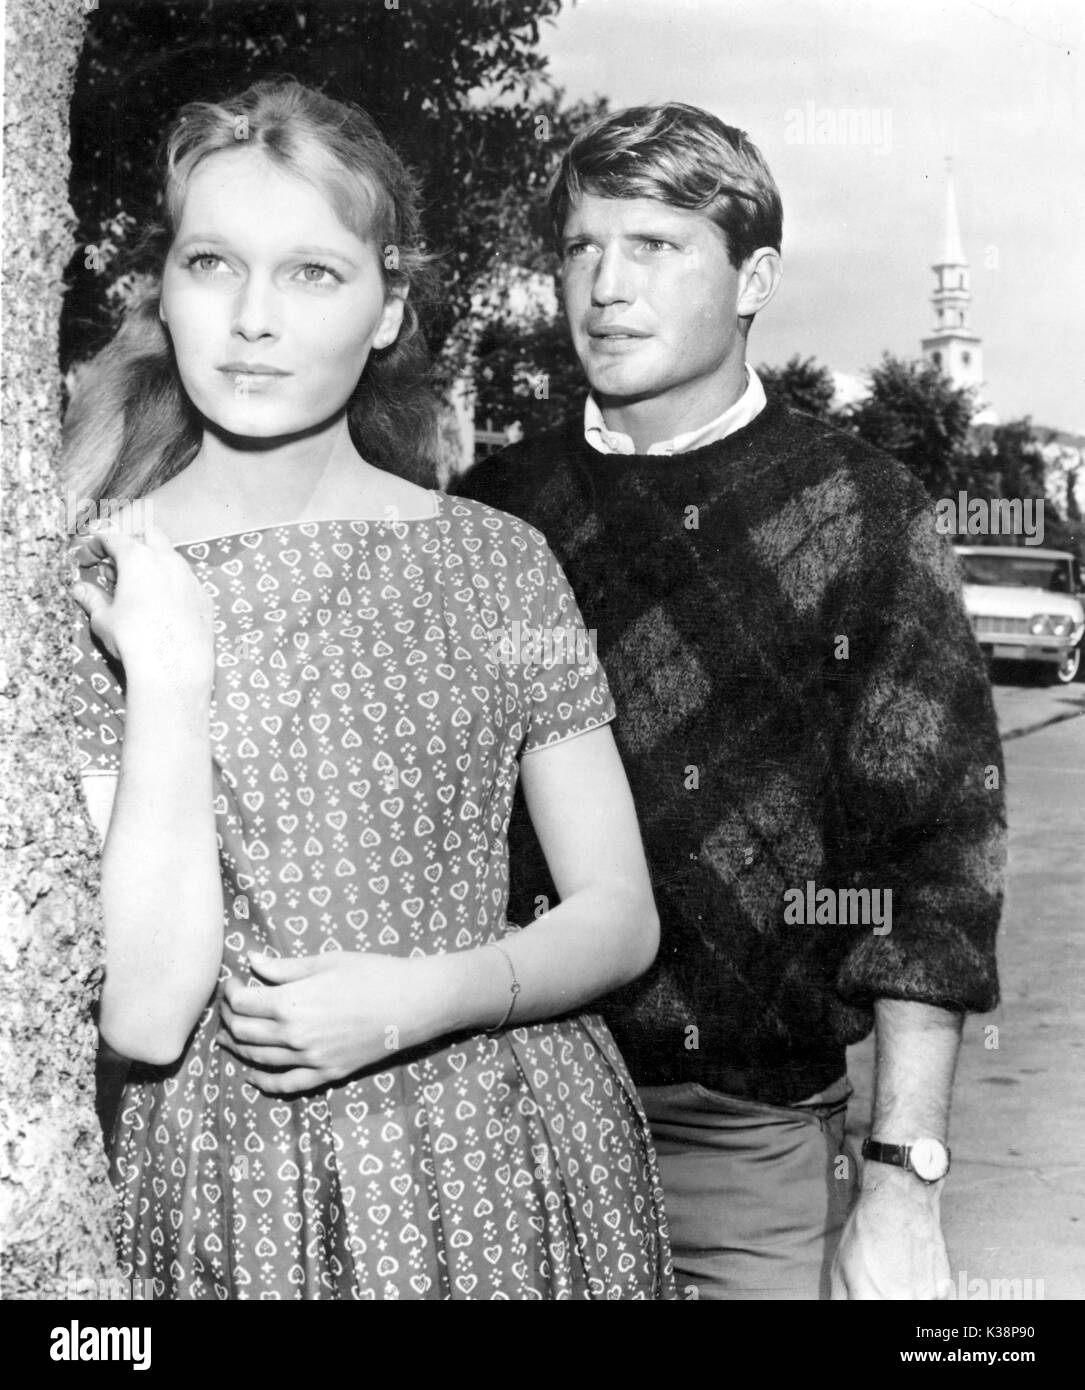 PEYTON PLACE Mia Farrow, CHRISTOPHER CONNELLY Banque D'Images